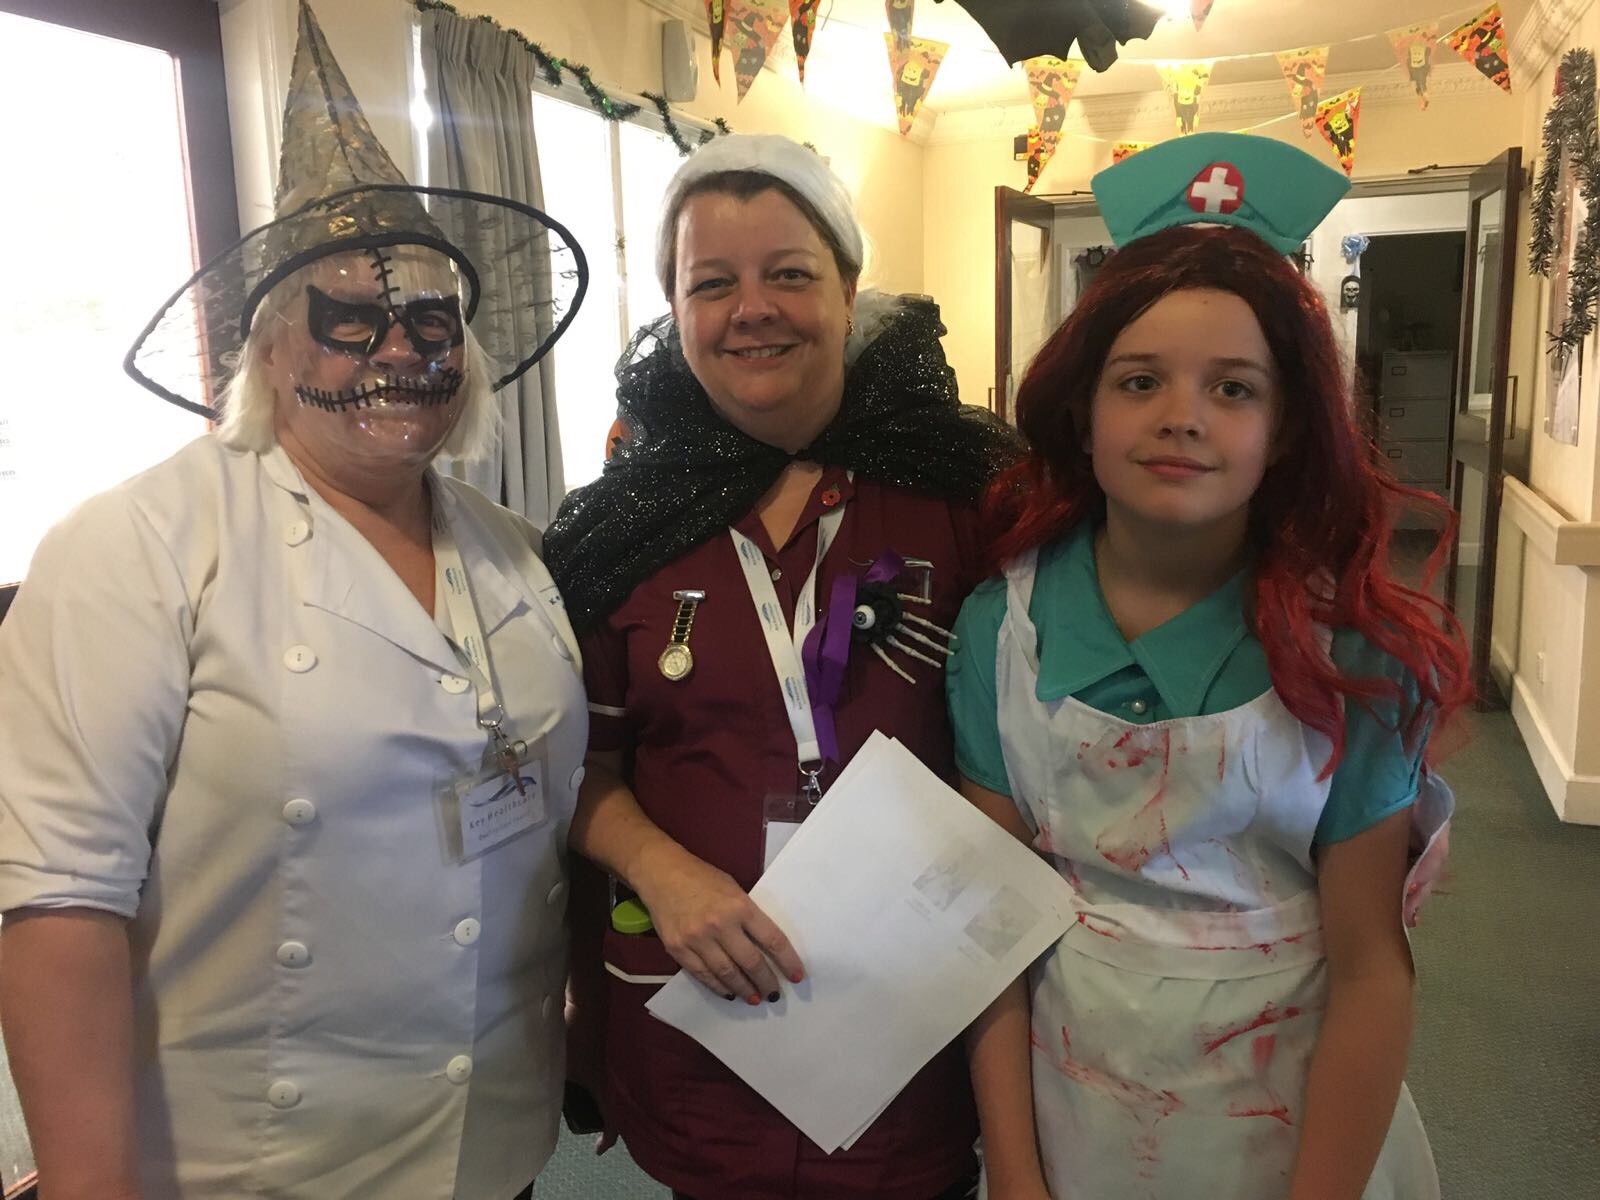 Spooky Uniform at Halloween!: Key Healthcare is dedicated to caring for elderly residents in safe. We have multiple dementia care homes including our care home middlesbrough, our care home St. Helen and care home saltburn. We excel in monitoring and improving care levels.